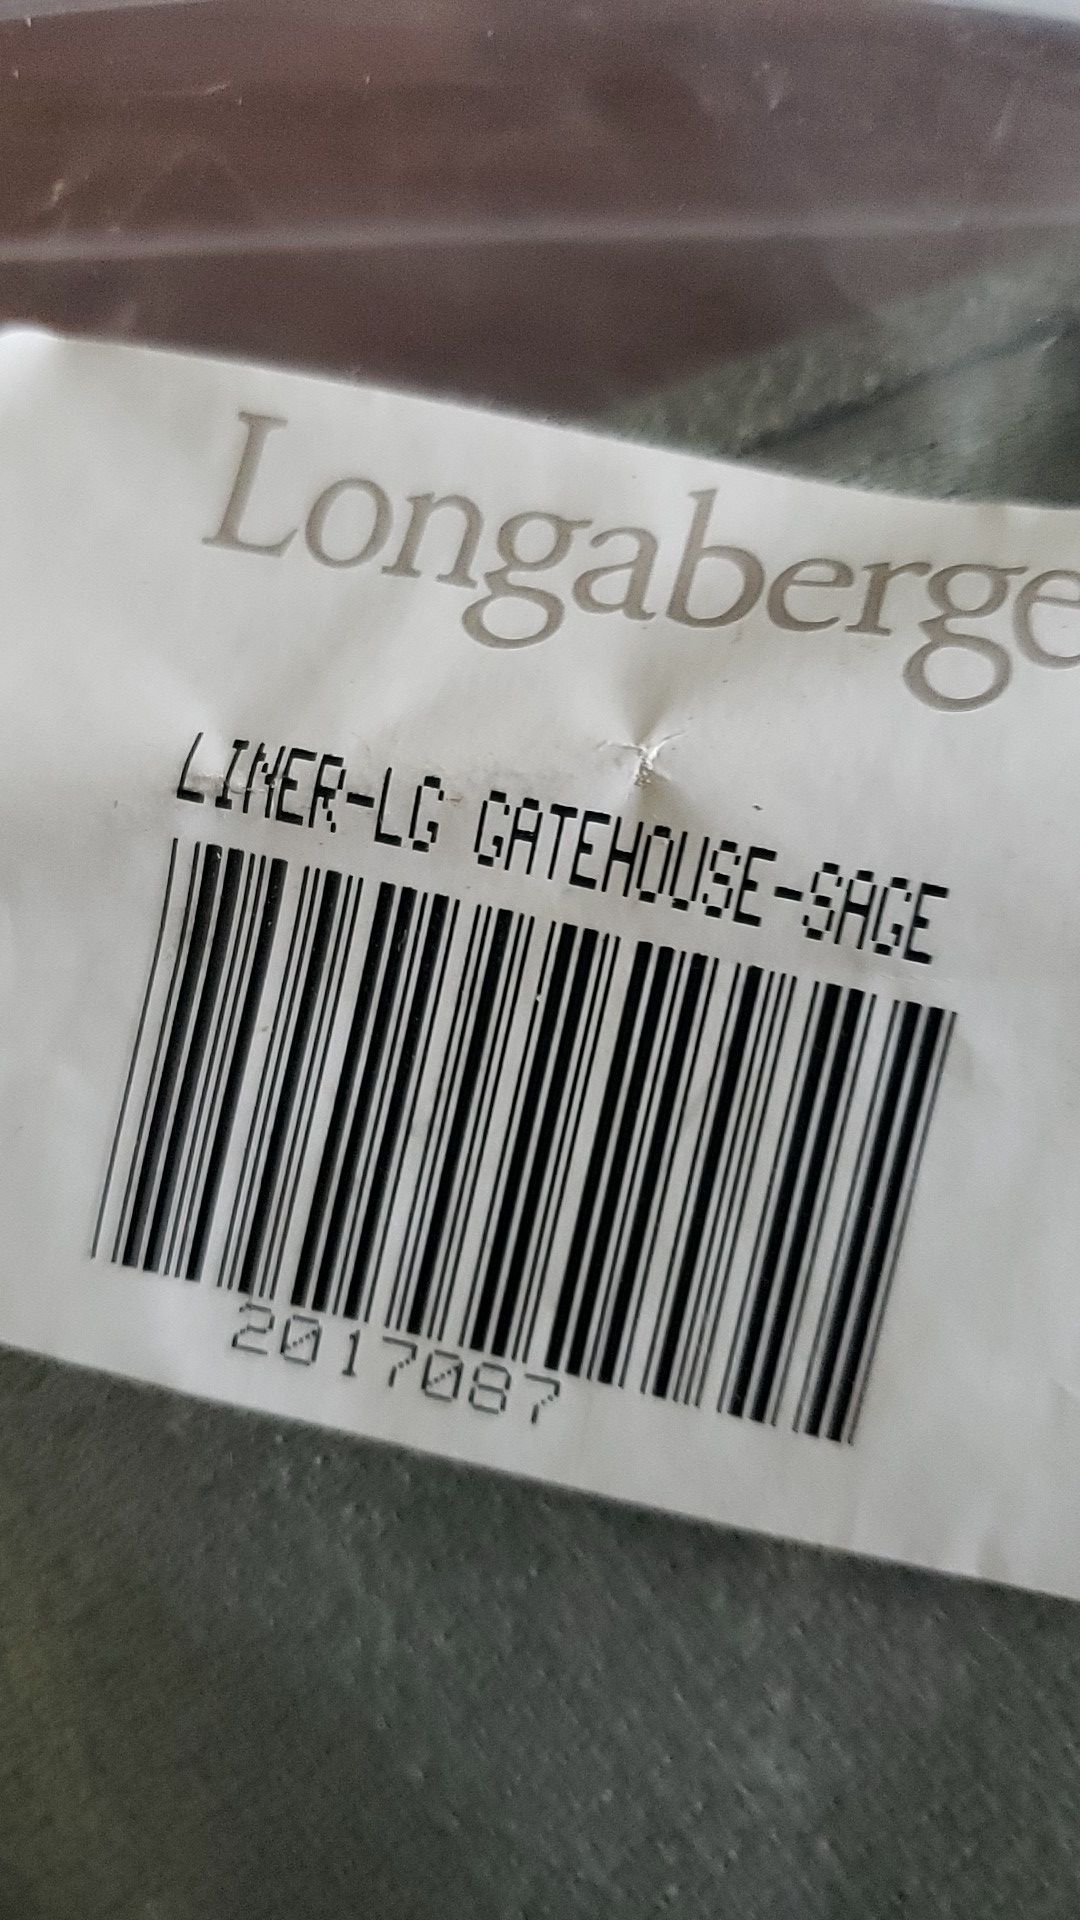 Retired Longaberger liners